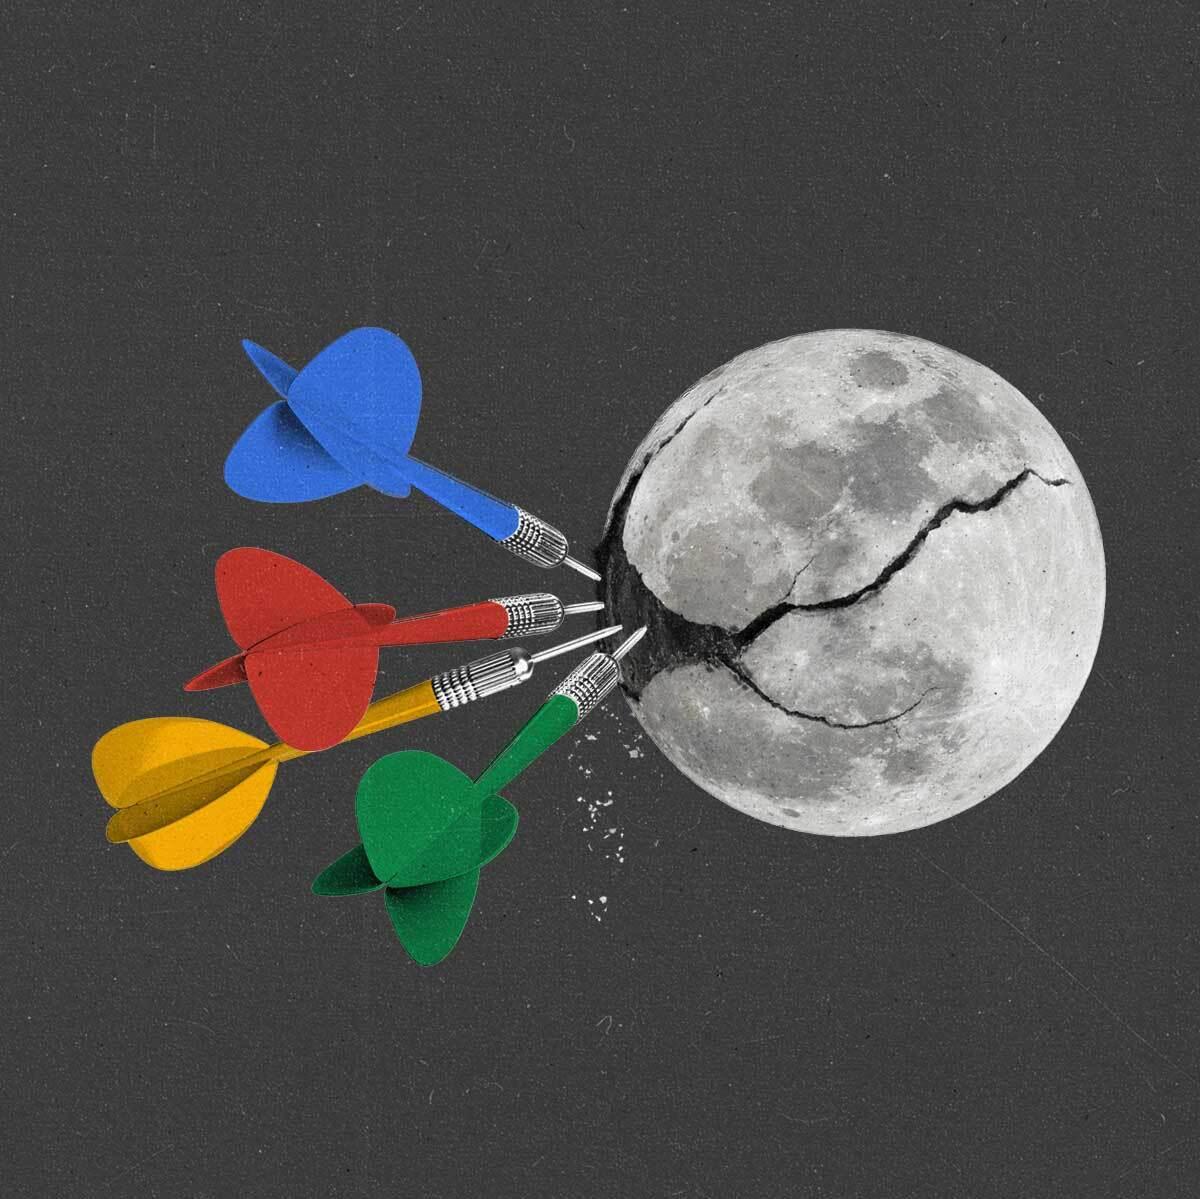 Four multicolored darts are embedded in a cracked moon.